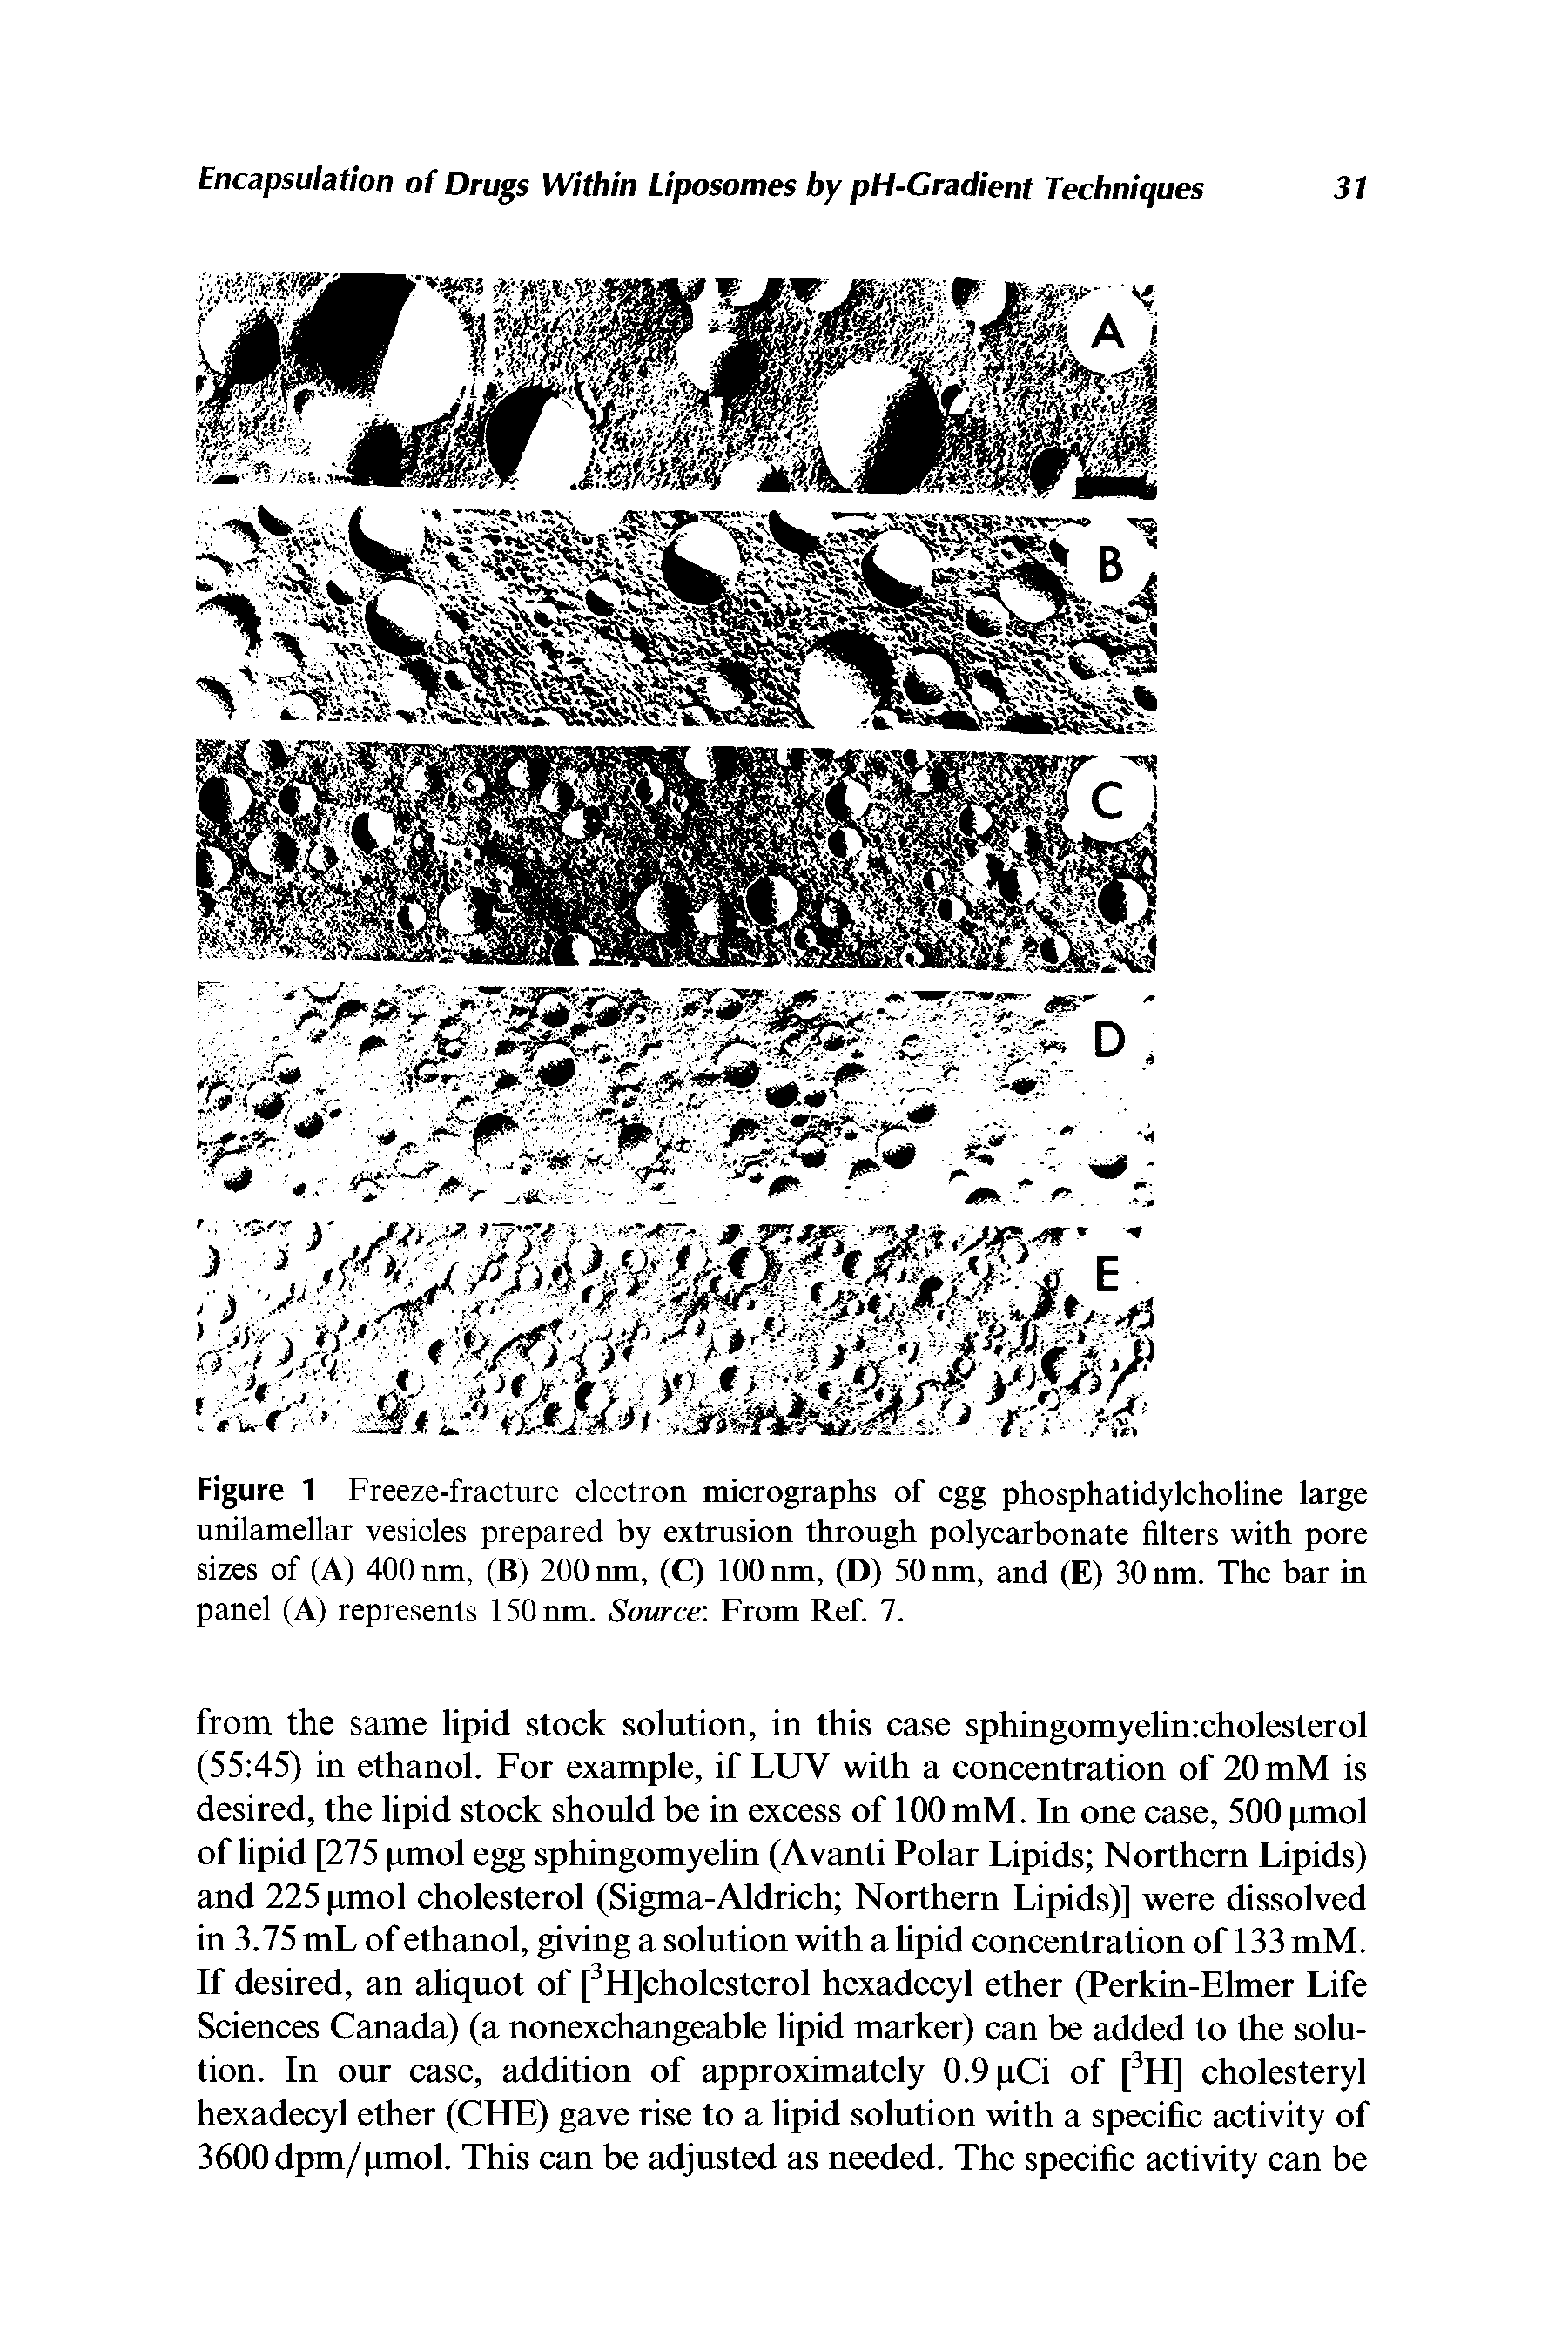 Figure 1 Freeze-fracture electron micrographs of egg phosphatidylcholine large unilamellar vesicles prepared by extrusion through polycarbonate filters with pore sizes of (A) 400 nm, (B) 200 run, (Q 100 nm, (D) 50 nm, and (E) 30 nm. The bar in panel (A) represents 150nm. Source From Ref. 7.